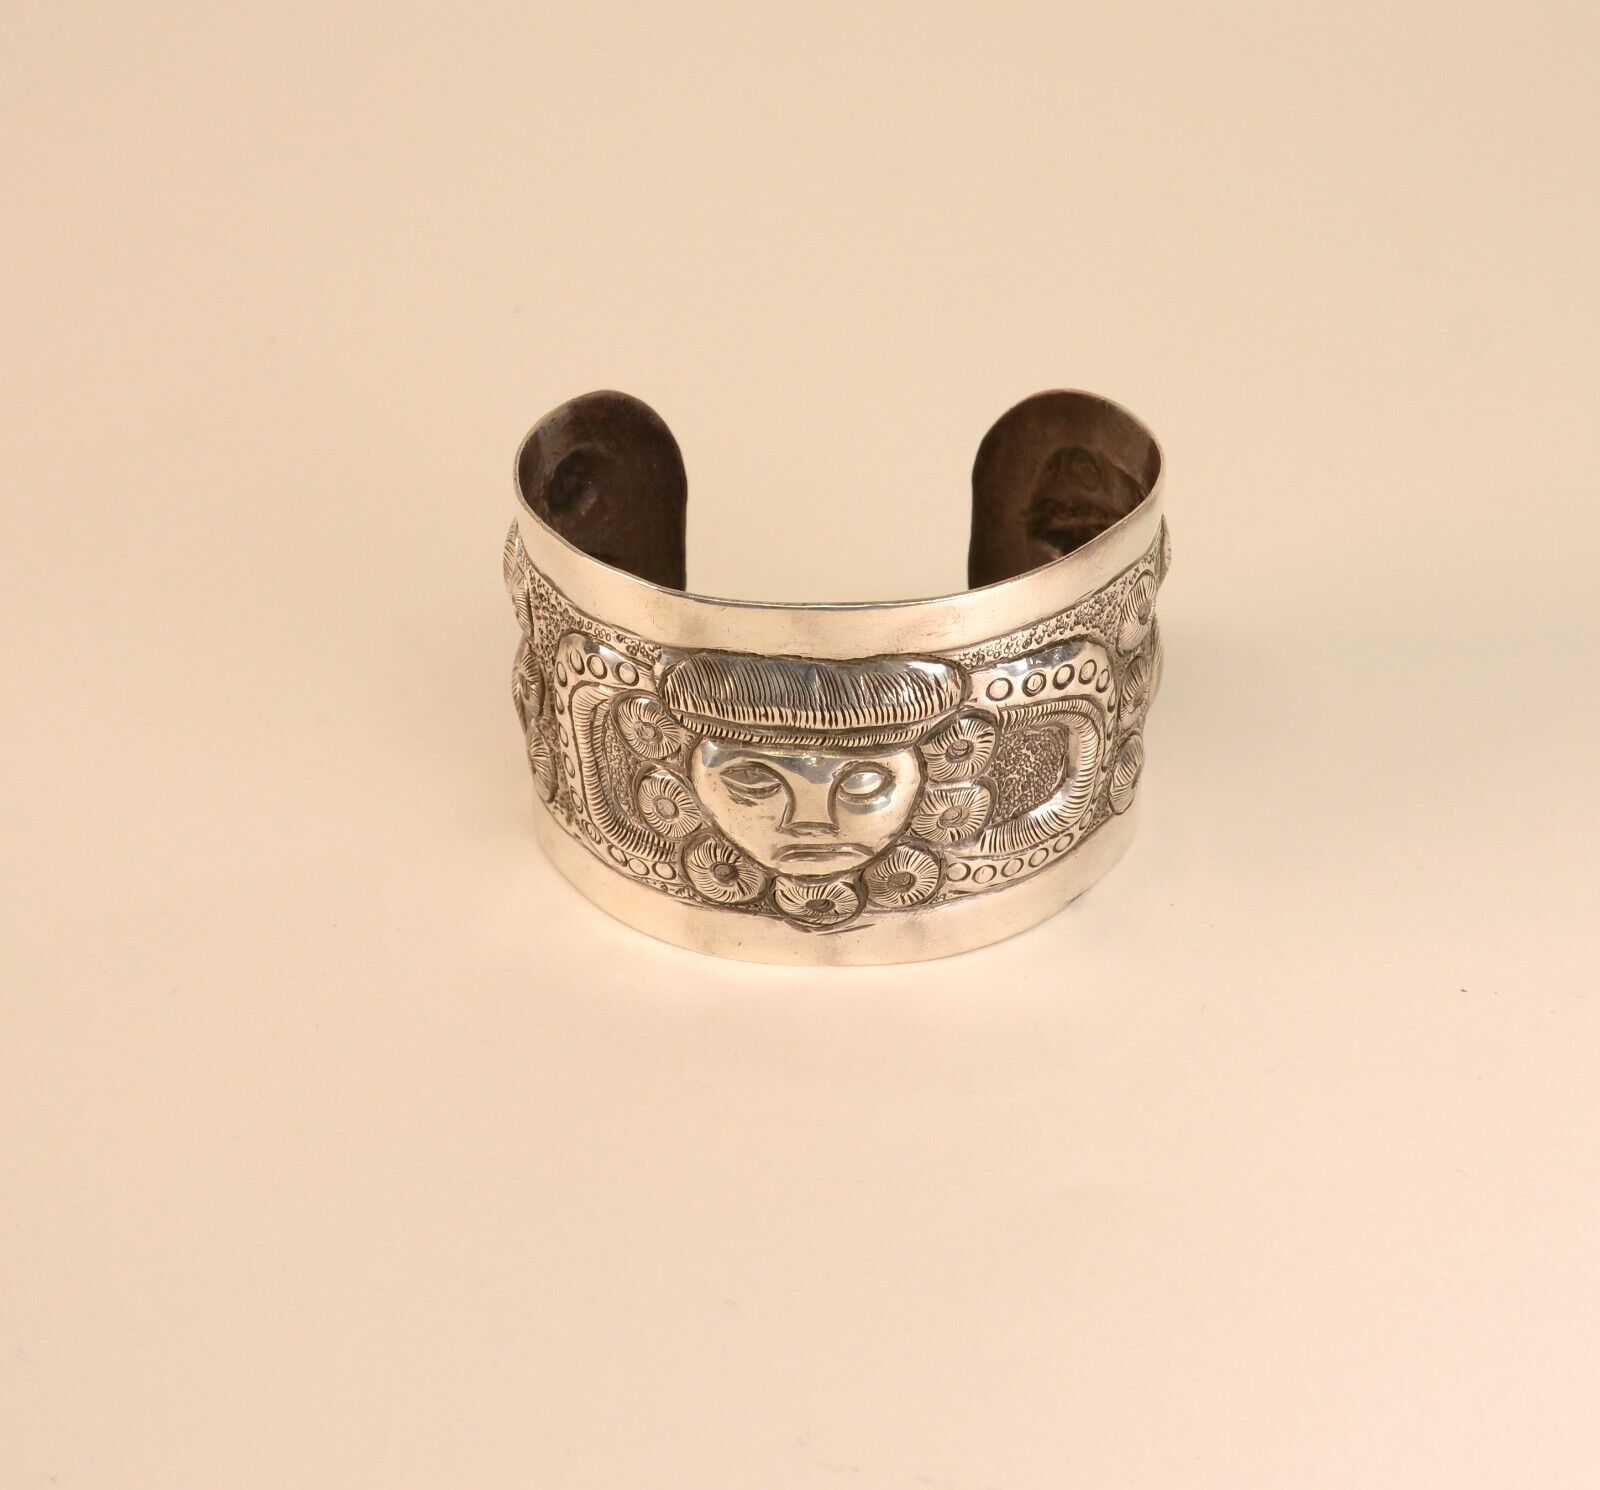 Antique Taxco Jewelry; Large Bracelet Sterling Silver Large Cuff; Mayan Face